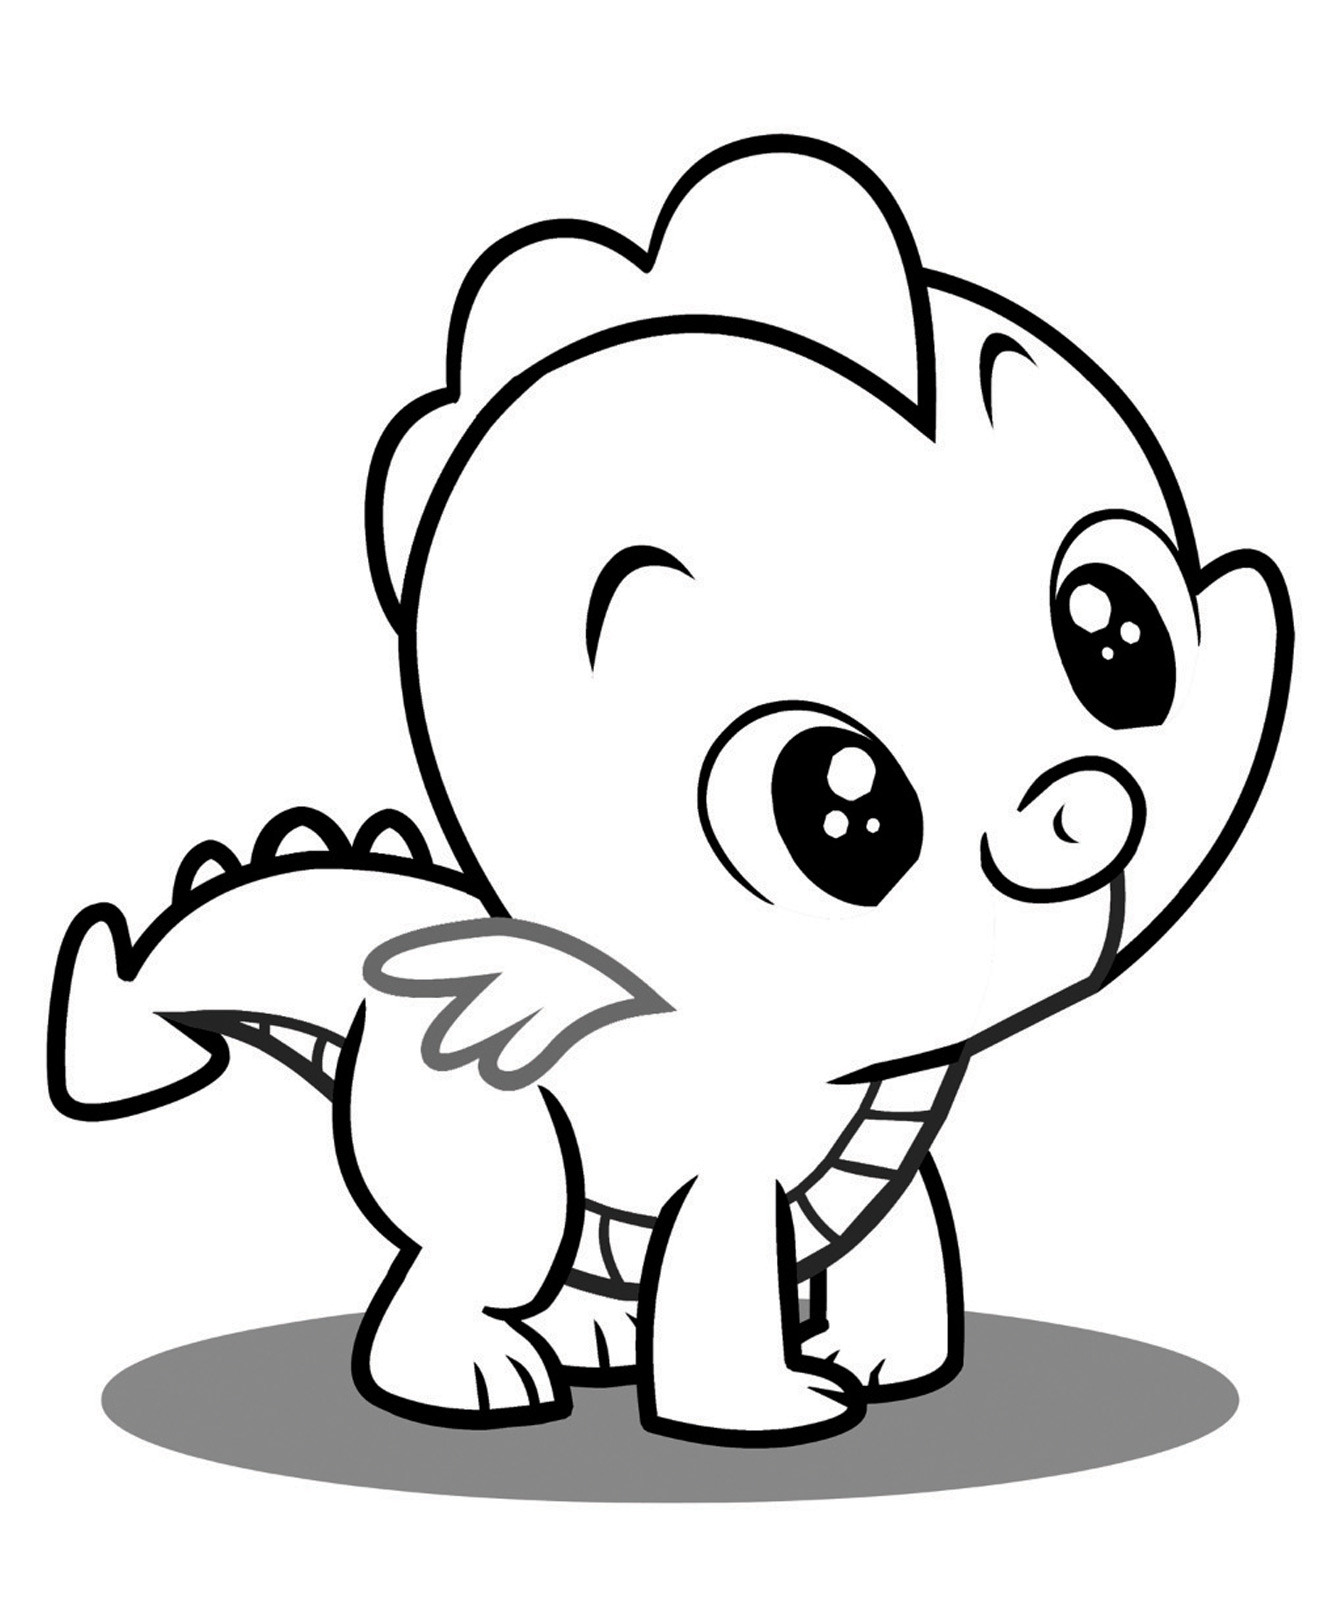 Coloring Sheets For Little Kids
 My Little Pony Spike Coloring Pages